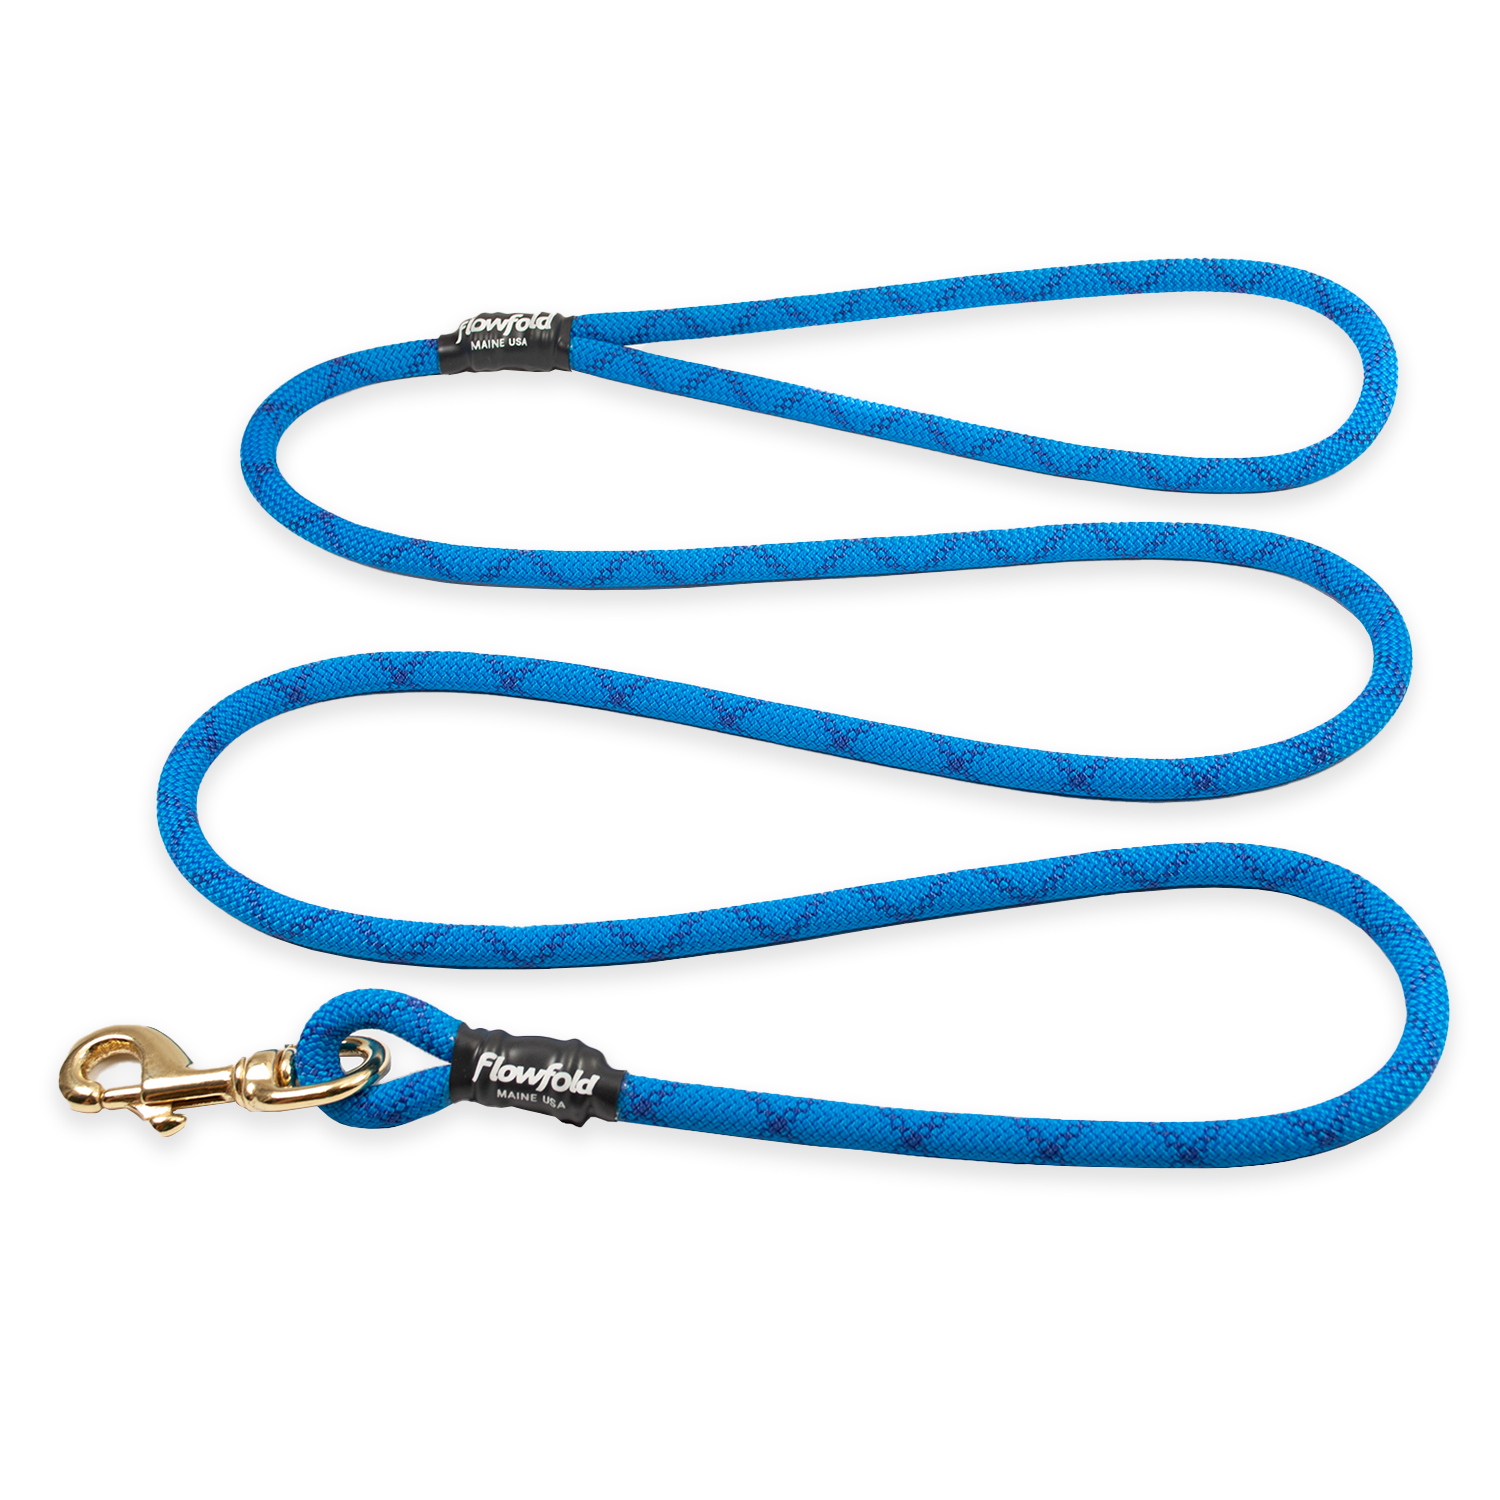 Flowfold Trailmate Recycled Climbing Rope 4ft Dog Leash